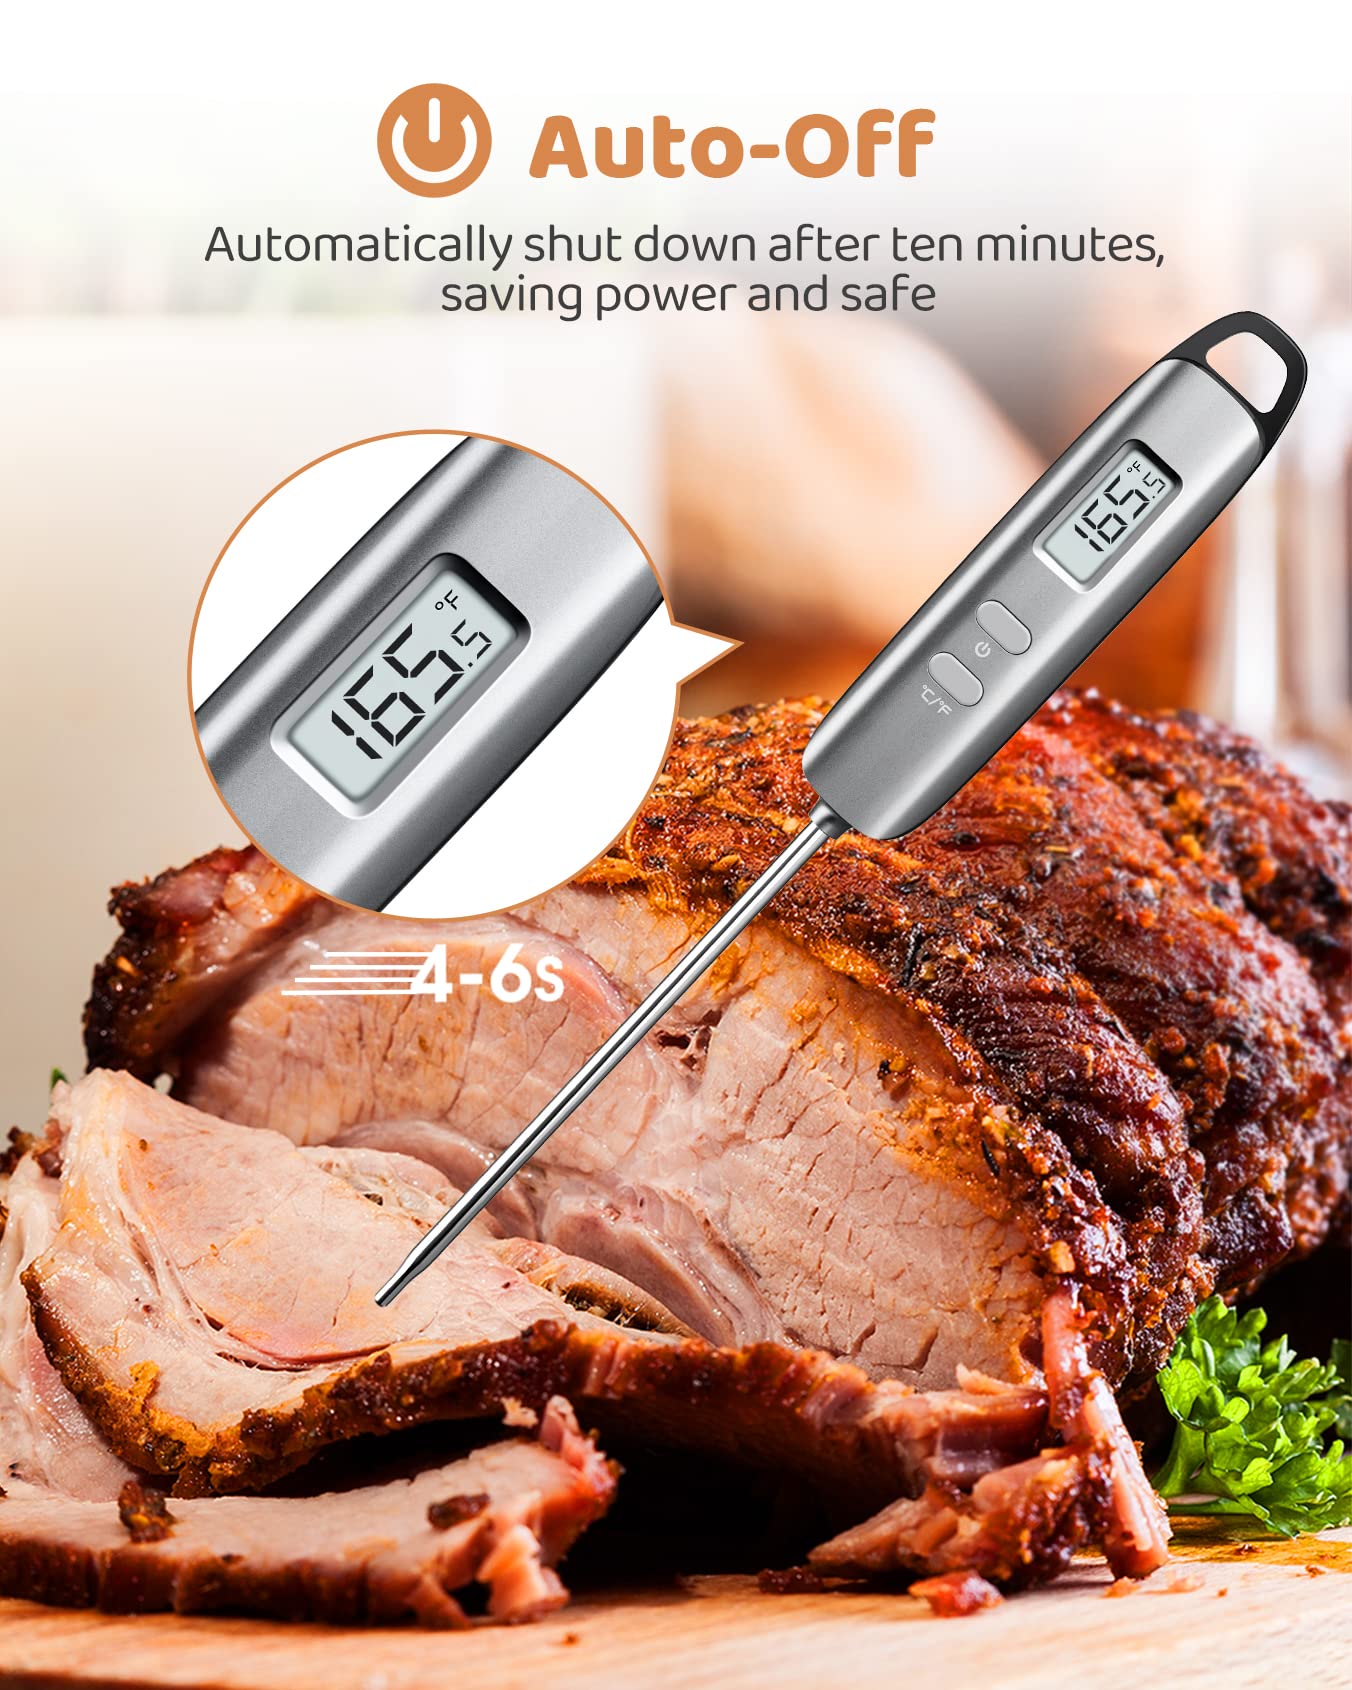 Digital Meat Thermometer, Candy Thermometer for Cooking, Instant Read Food Thermometer with 4.7 Inch Long Probe, Kitchen Thermometer with Protect Sheath Auto-shutoff for Turkey Grill Oven BBQ Smoker